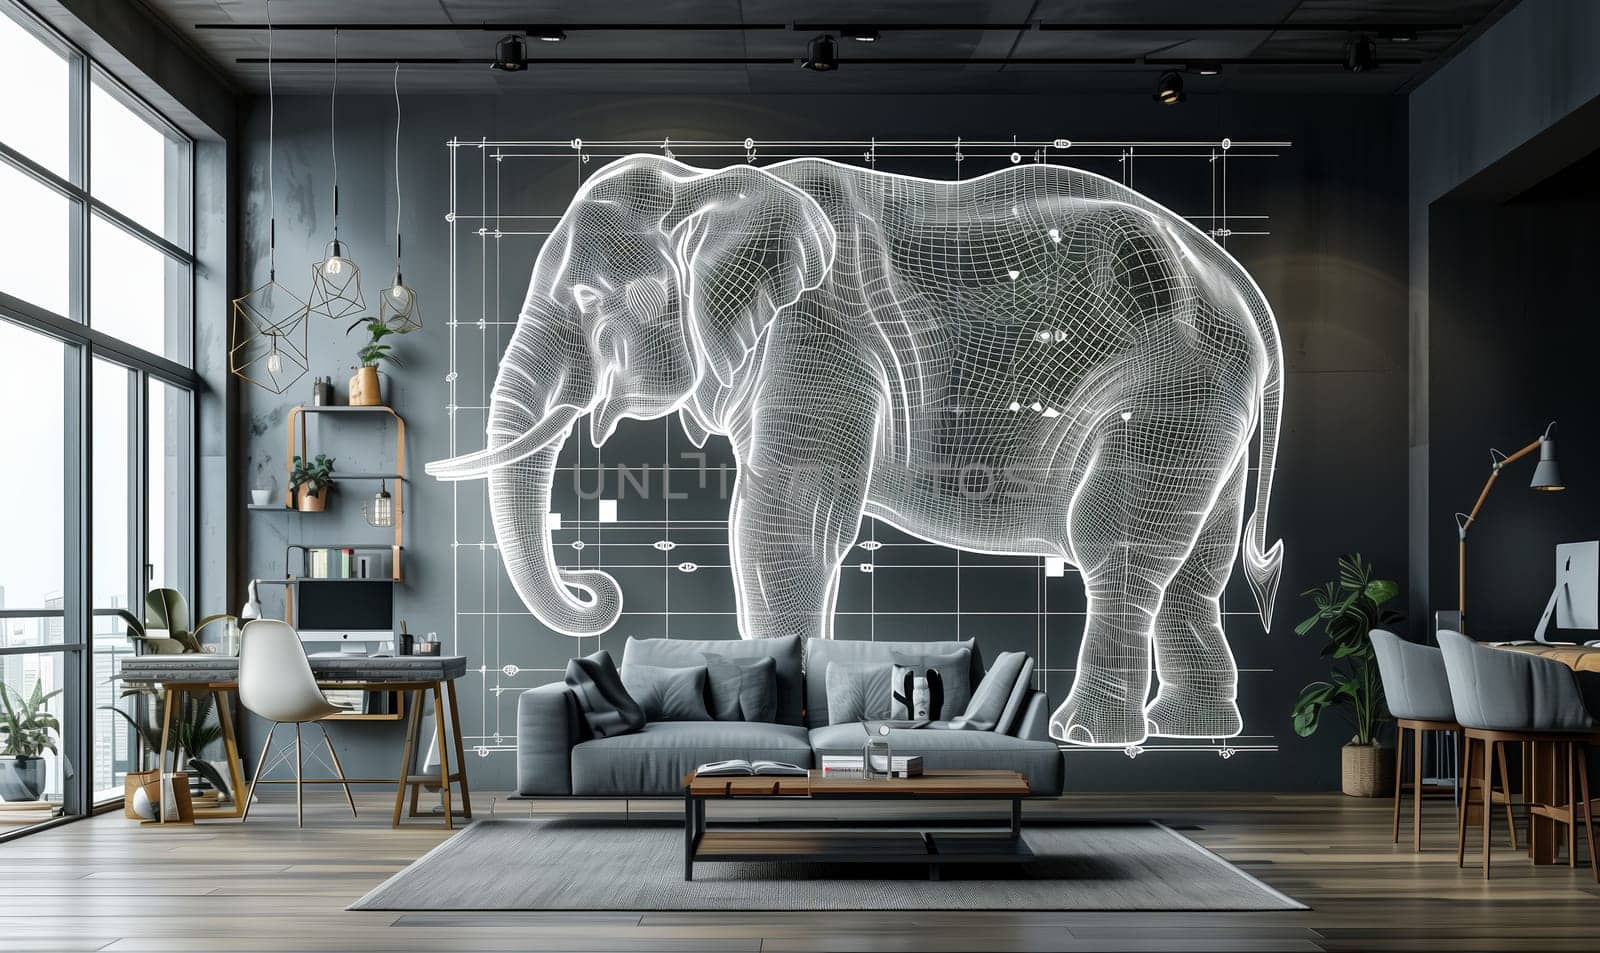 Elephant Projection in Living Room. by Fischeron